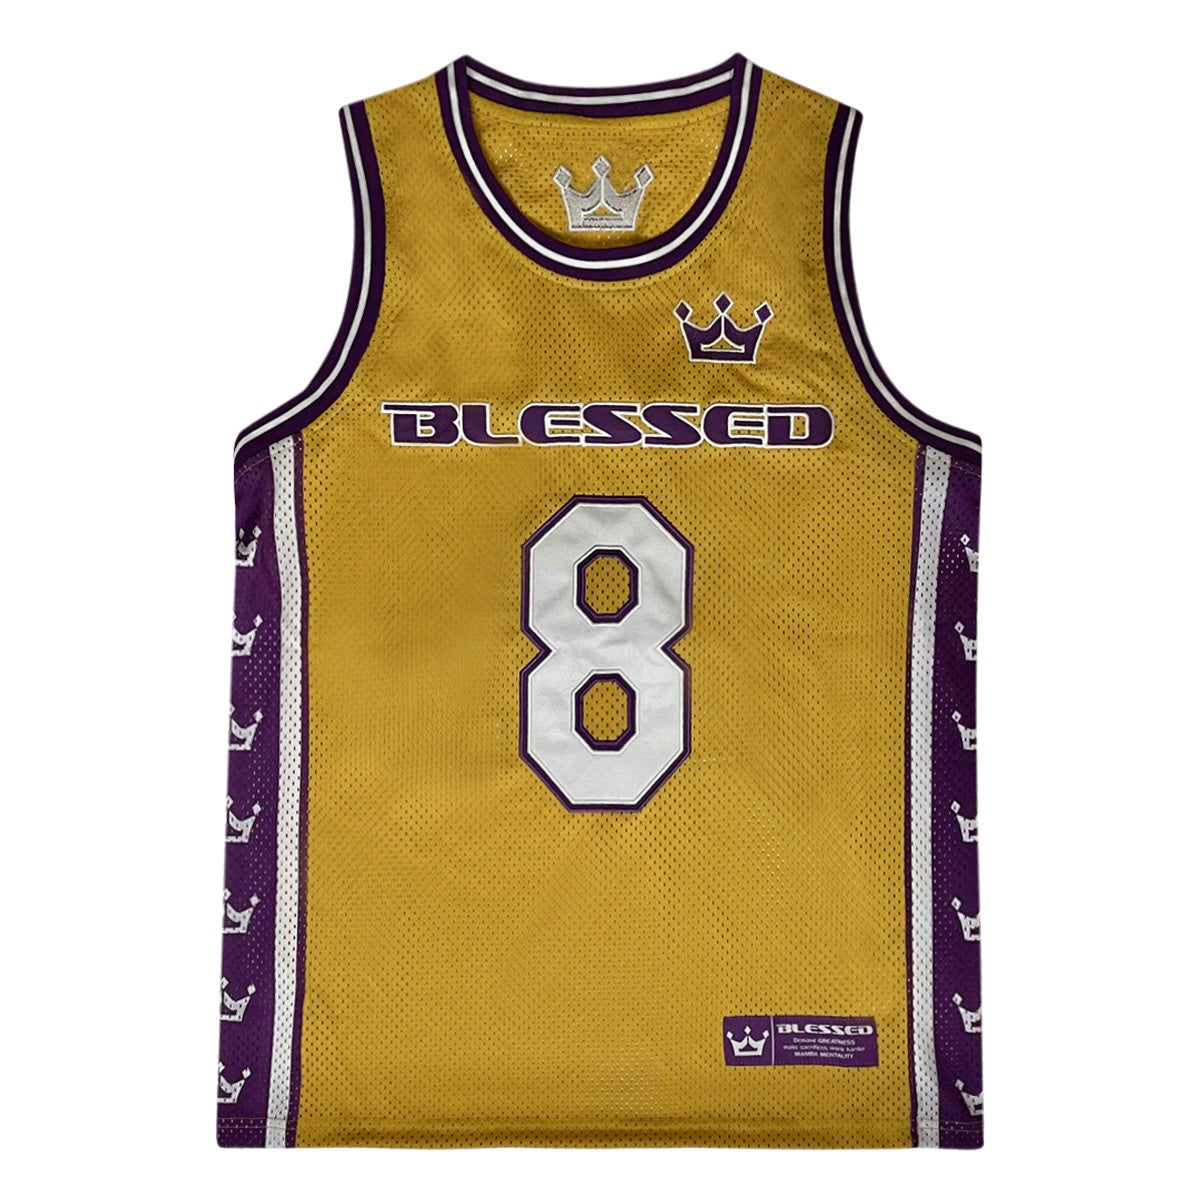 **Limited Edition** 2.8.24 Blessed “Greatness“ Jersey          MAMBA 24